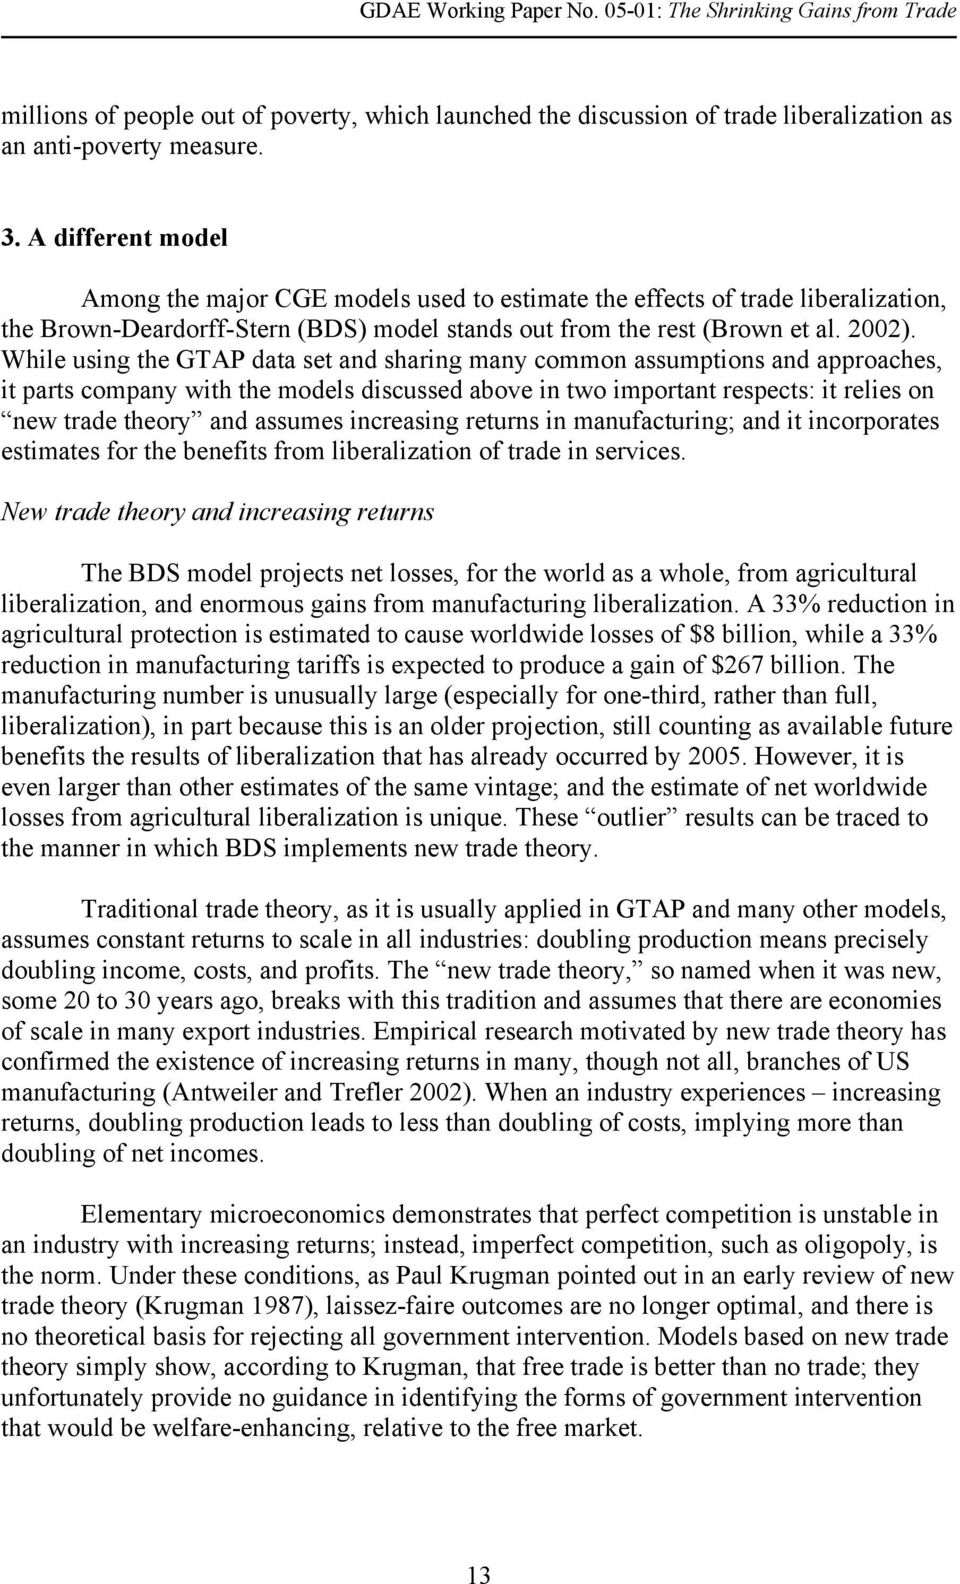 While using the GTAP data set and sharing many common assumptions and approaches, it parts company with the models discussed above in two important respects: it relies on new trade theory and assumes